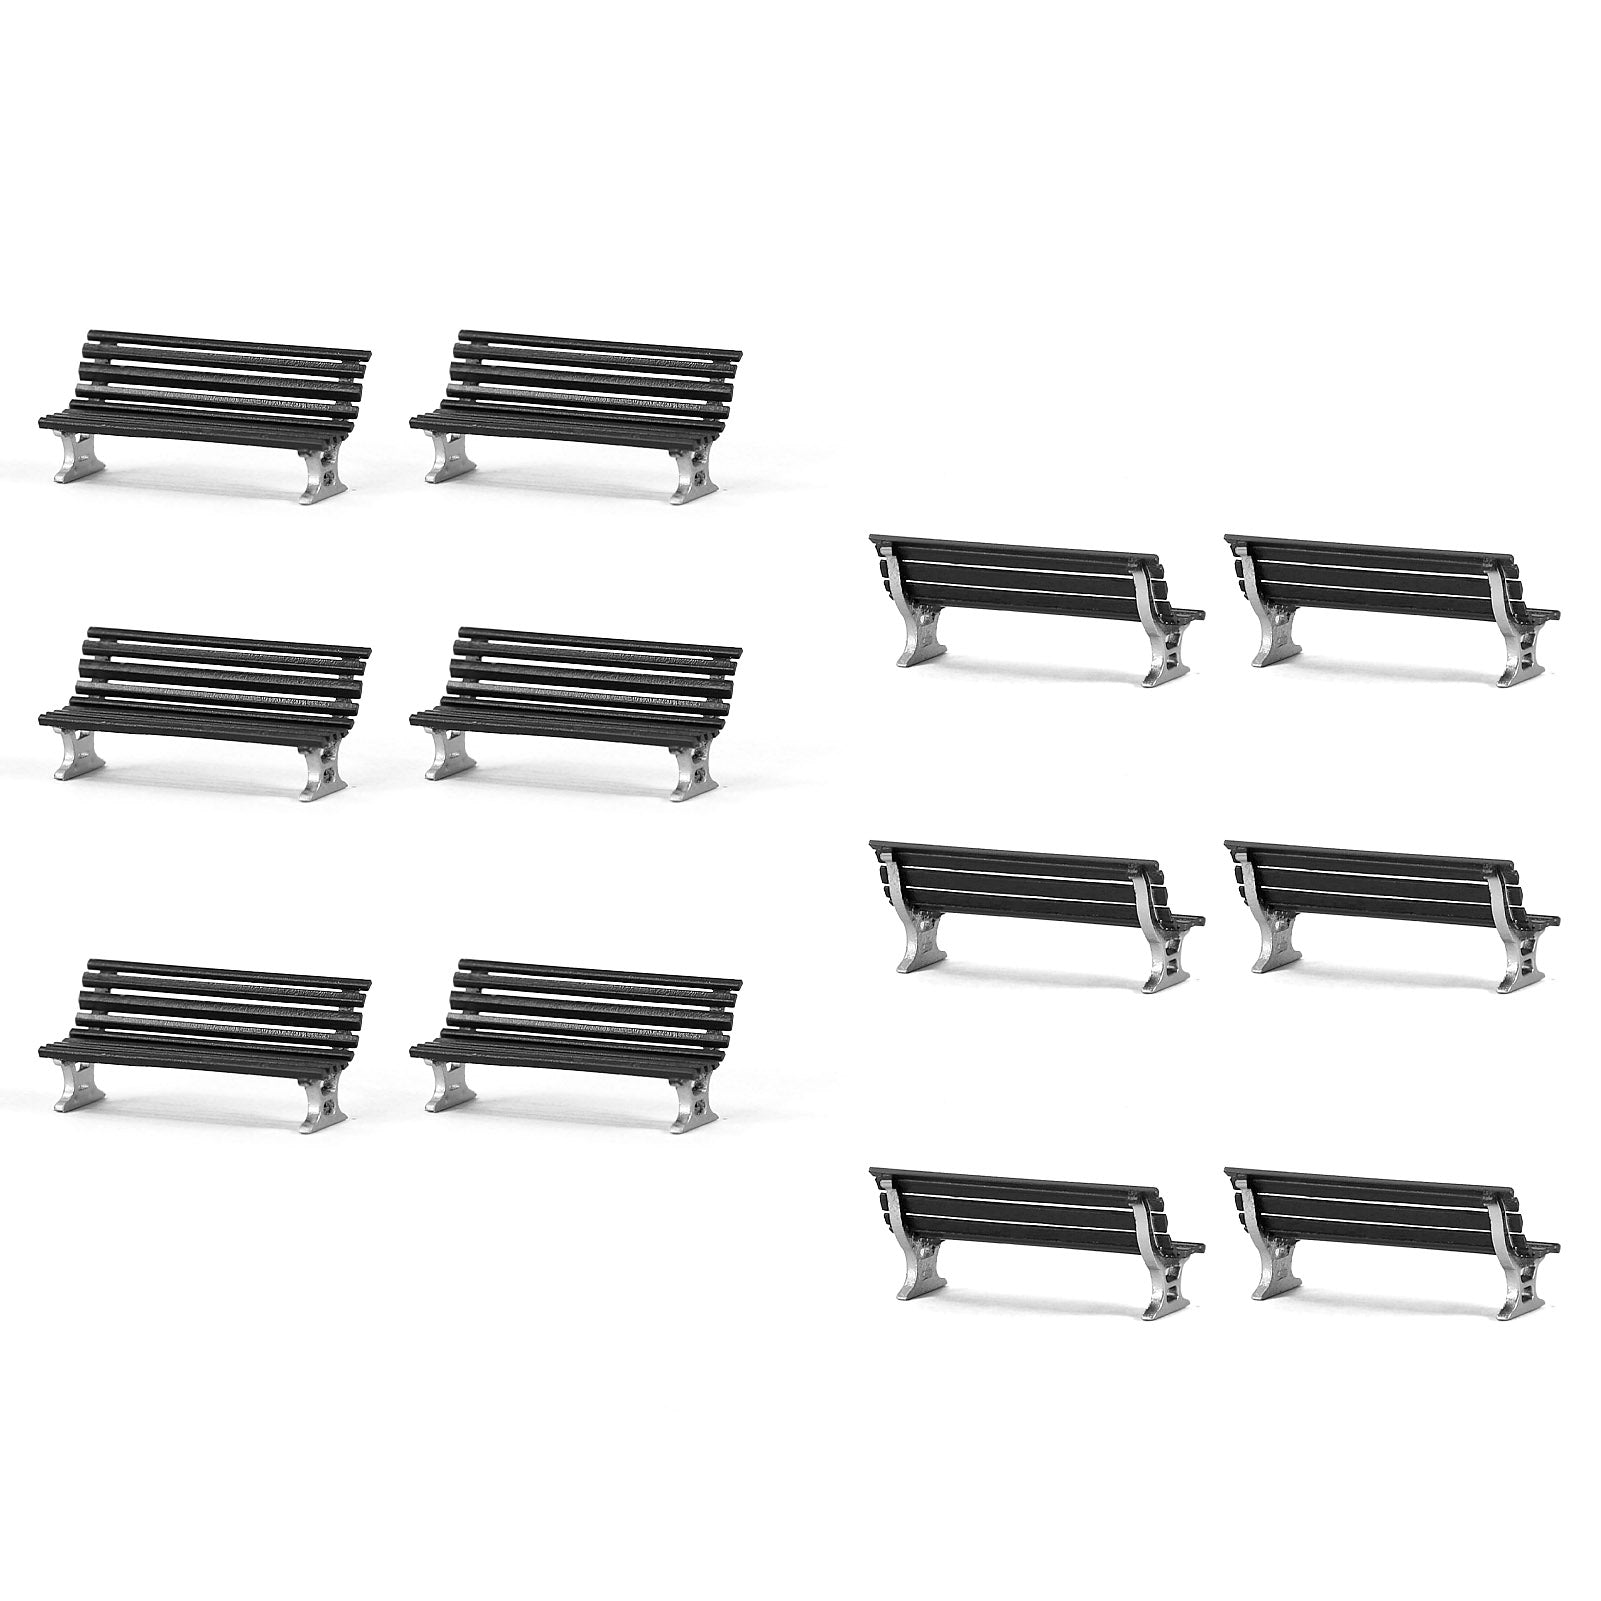 ZY38087 12pcs HO Scale 1:87 Model  Park Garden Benches Street Station Seat Chairs